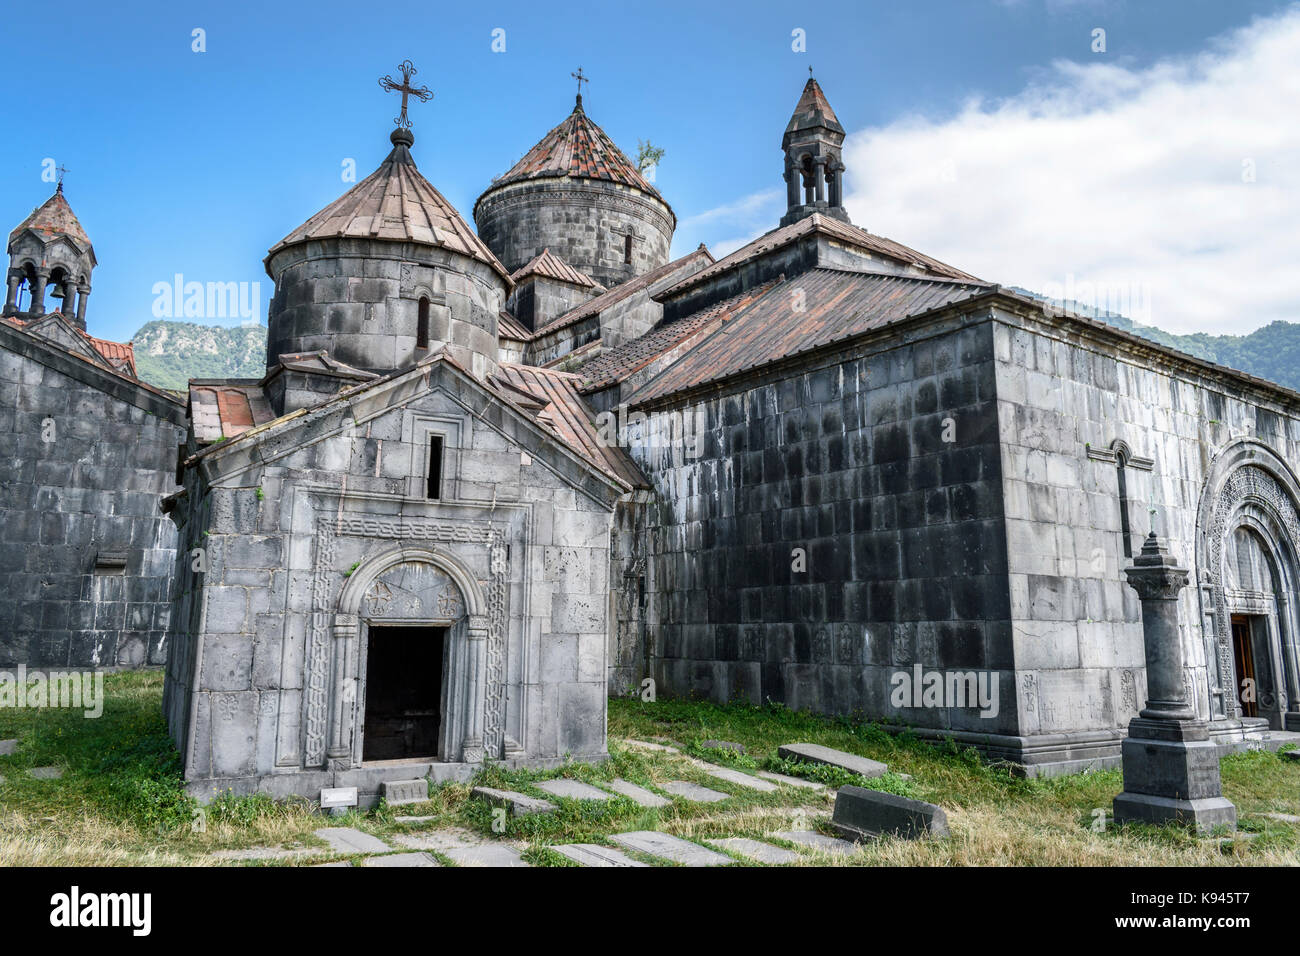 Exterior view of the medieval Haghpat Monastery, Haghpat, Armenia. Stock Photo